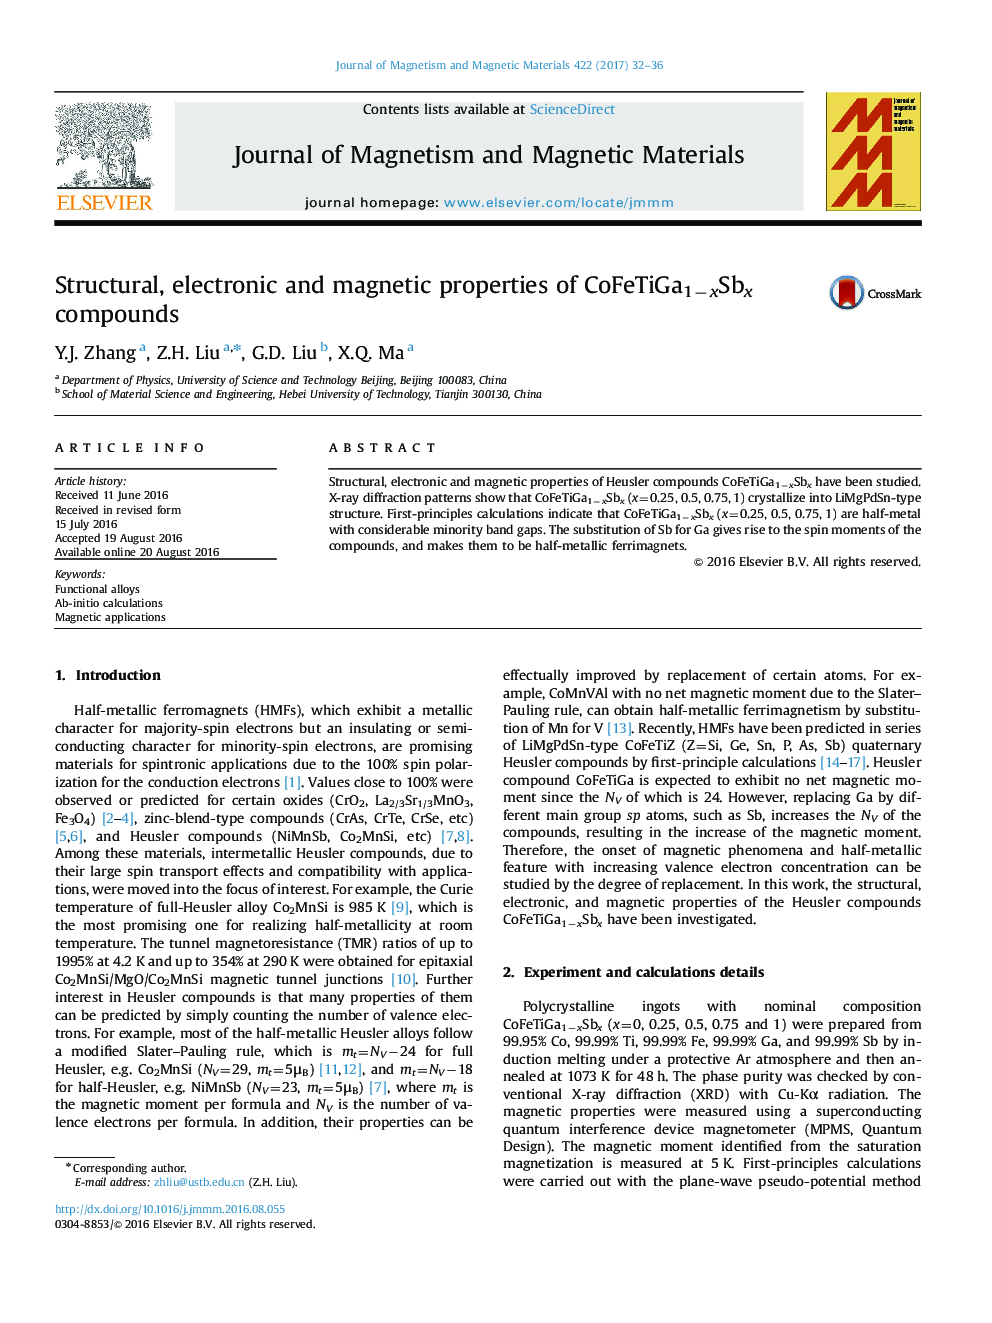 Structural, electronic and magnetic properties of CoFeTiGa1âxSbx compounds